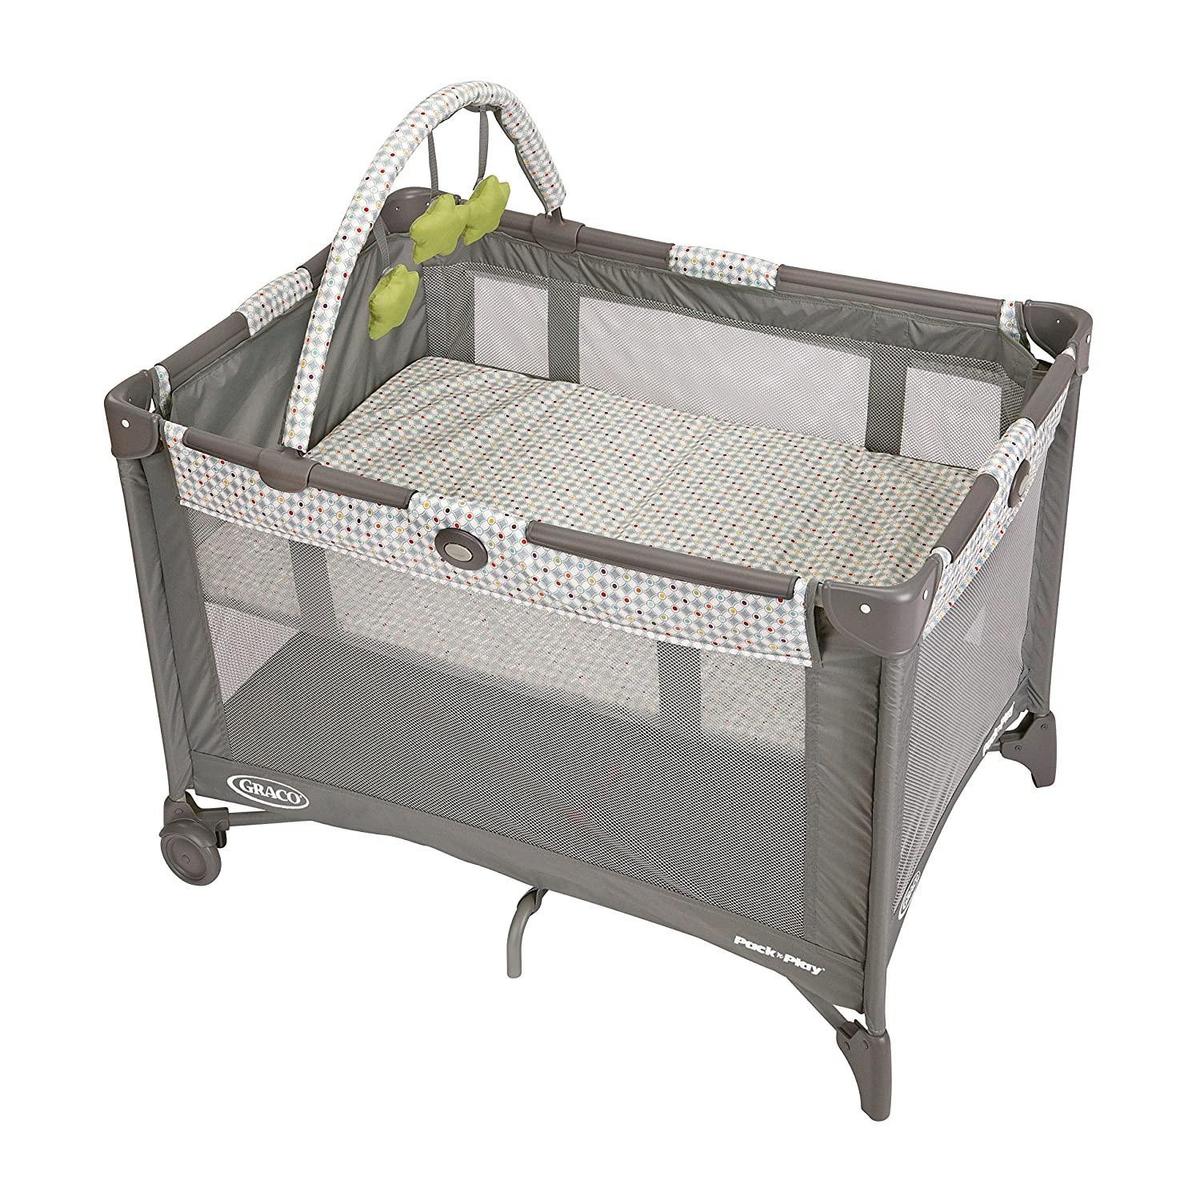 Graco Pack And Play On The Go Playard, Includes Full-Size Infant Bassinet, Push Button- $74.99 MSRP